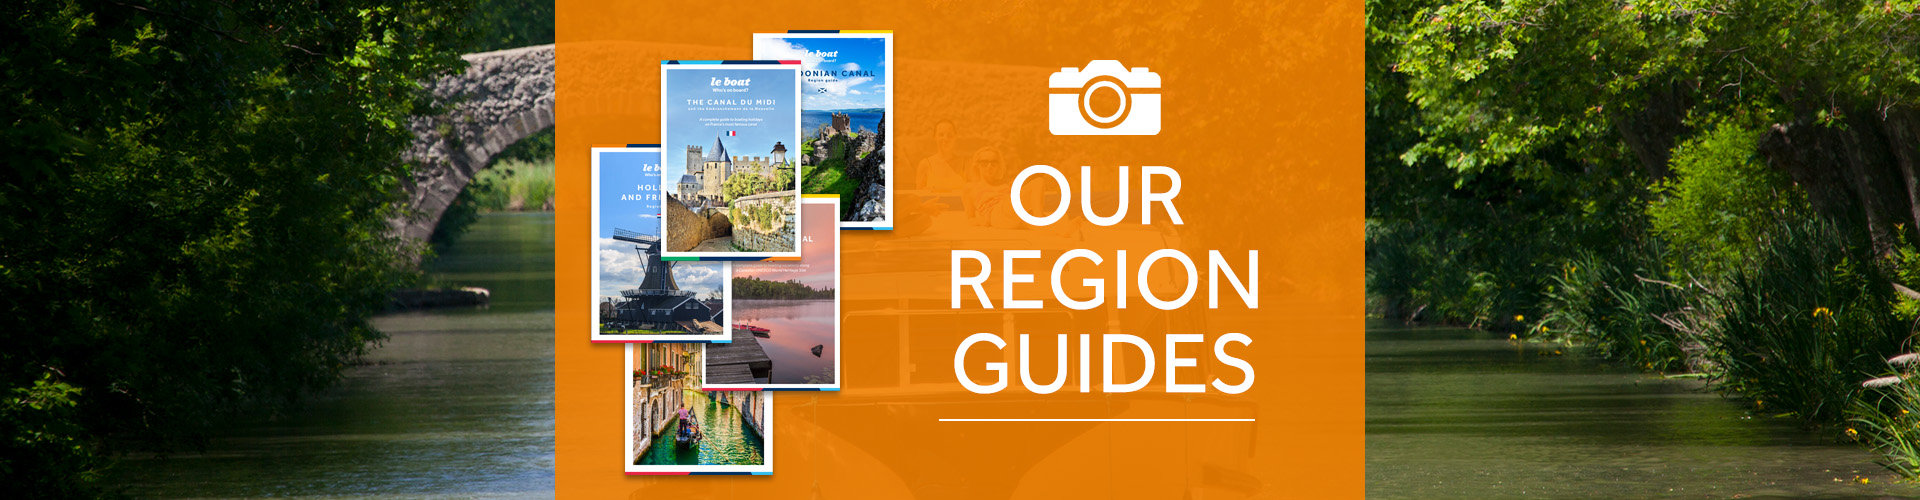 Our Region Guides